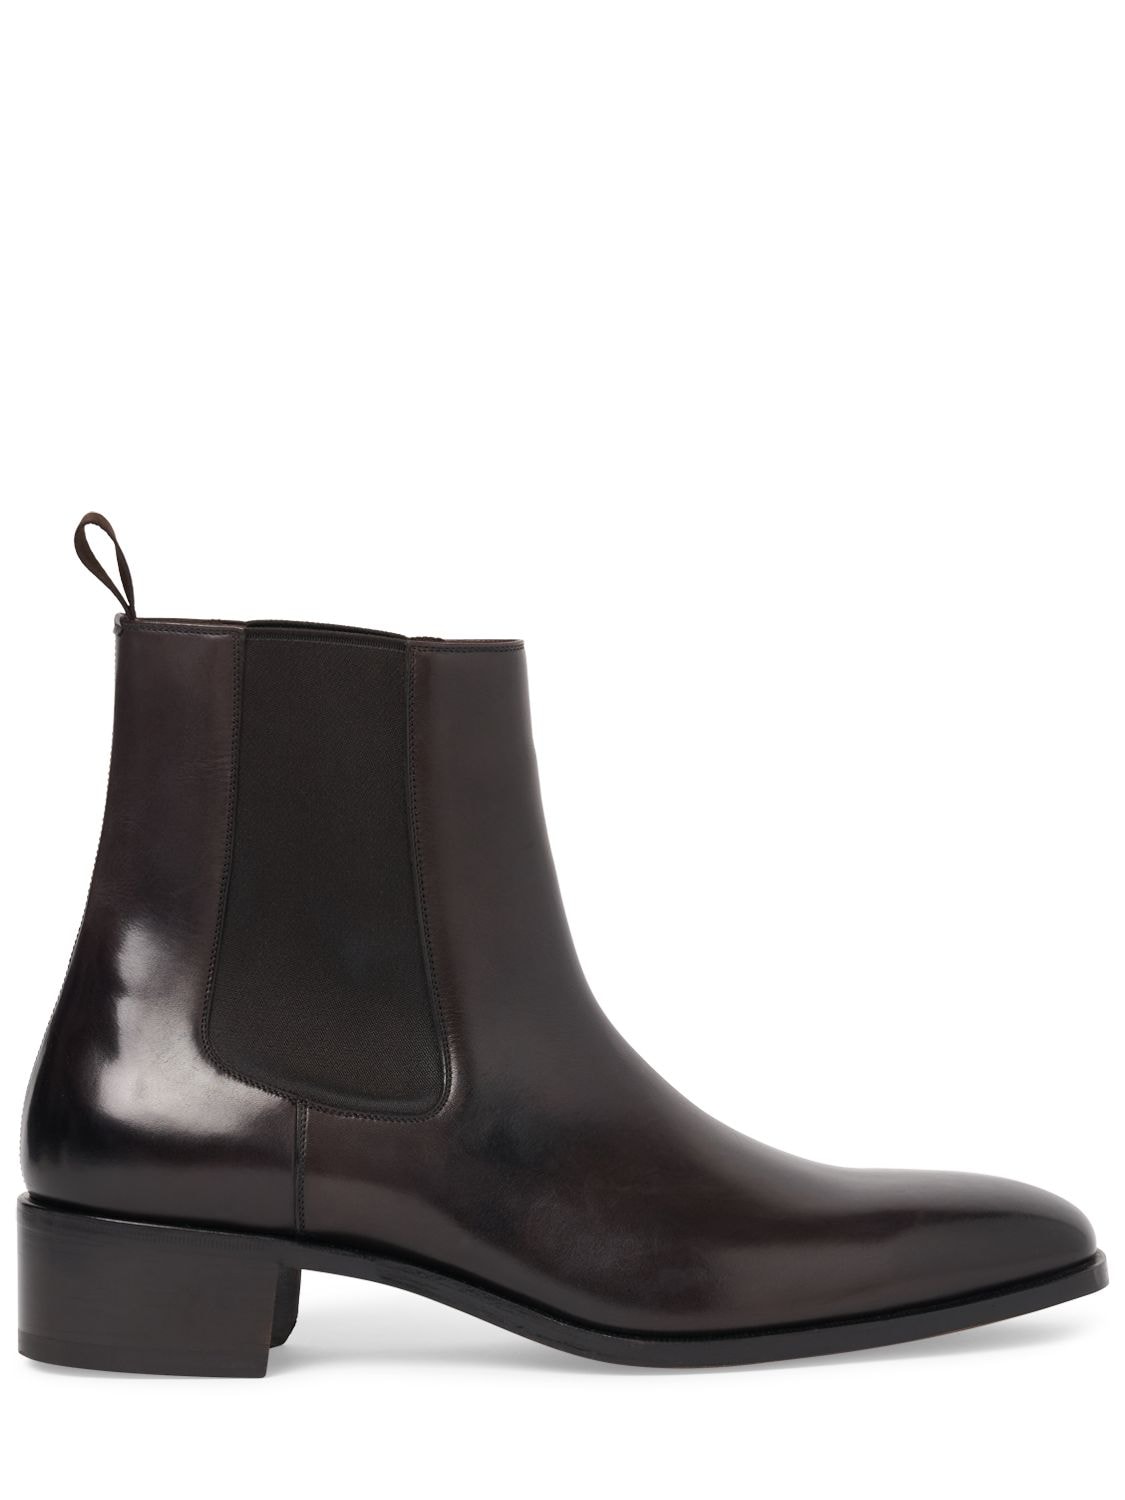 Image of Alec Leather Chelsea Boots